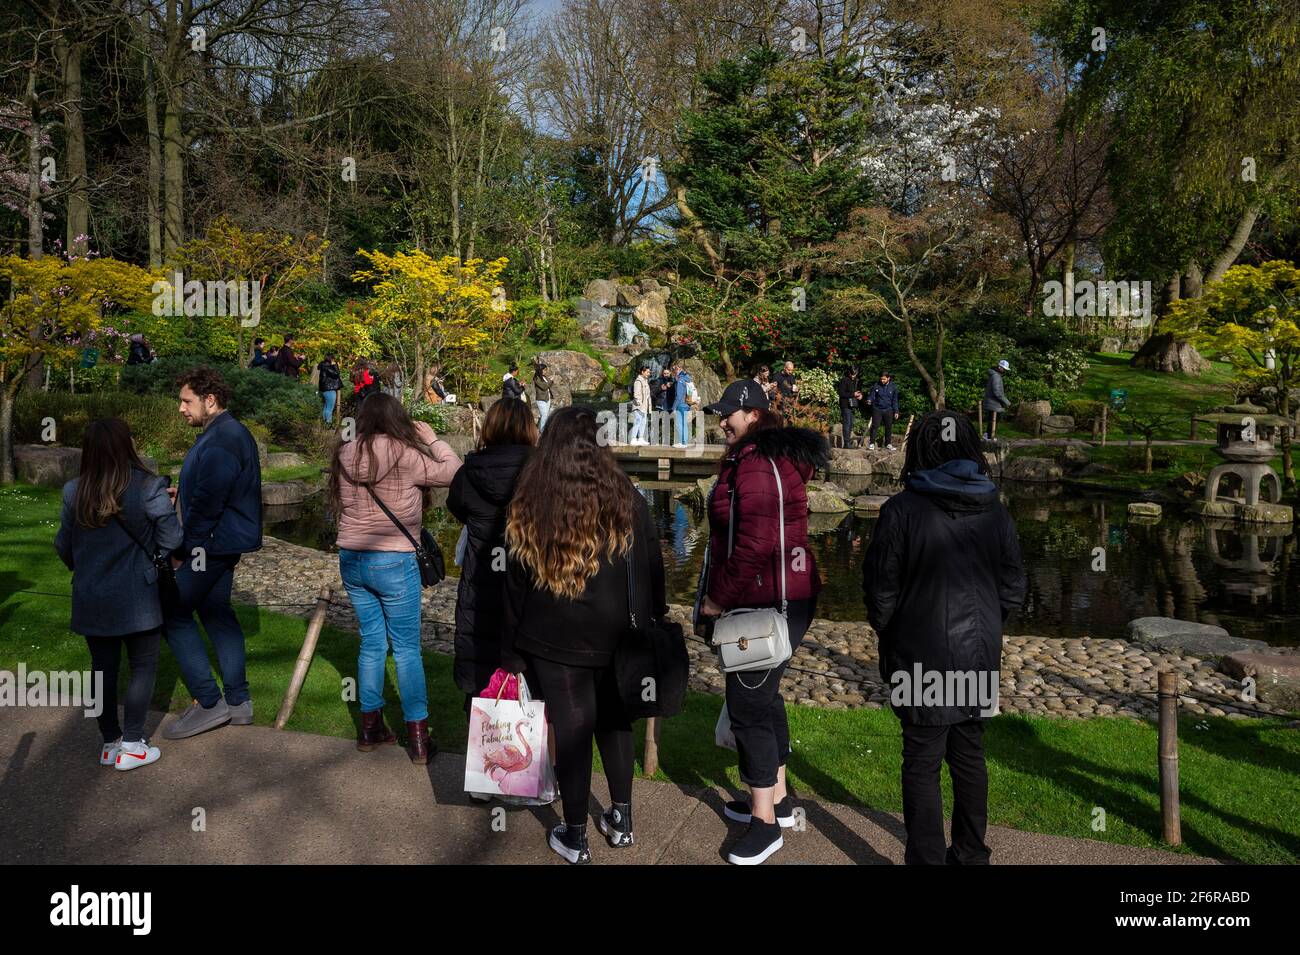 London, UK.  2 April 2021.  UK Weather:  People visit the Kyoto Garden in Holland Park, west London on Good Friday. Usually, the garden is quiet but as it is a public holiday and with lockdown restrictions slightly eased this week, many people have taken to the parks to enjoy the warmer conditions.   Credit: Stephen Chung / Alamy Live News Stock Photo